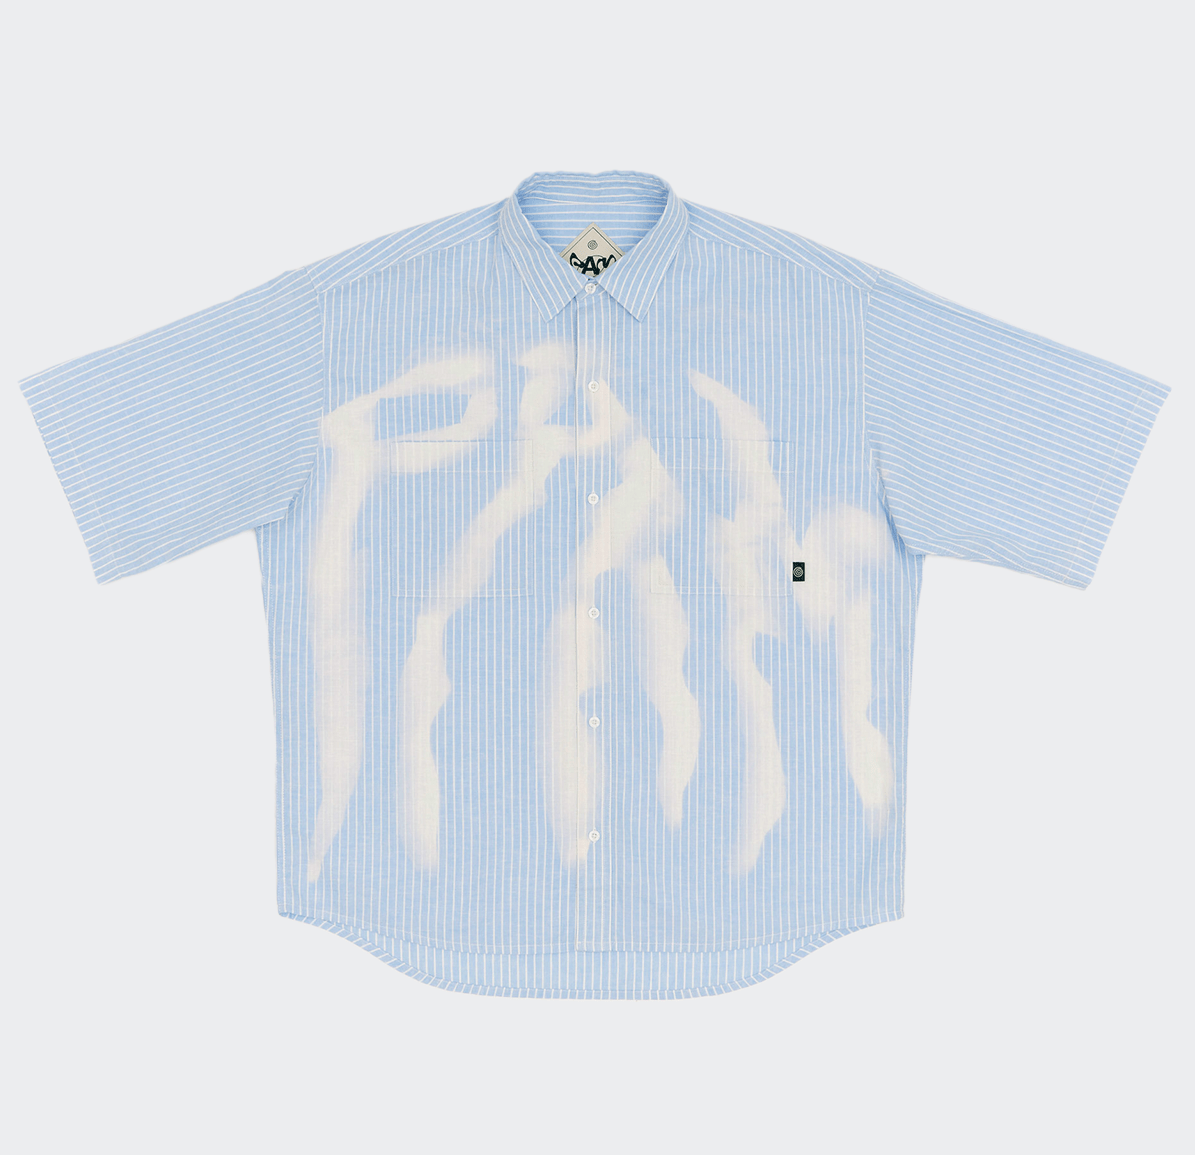 Perks And Mini Cadence Boxy Short Sleeve Shirt - Blue Stripe - P.A.M. - State Of Play